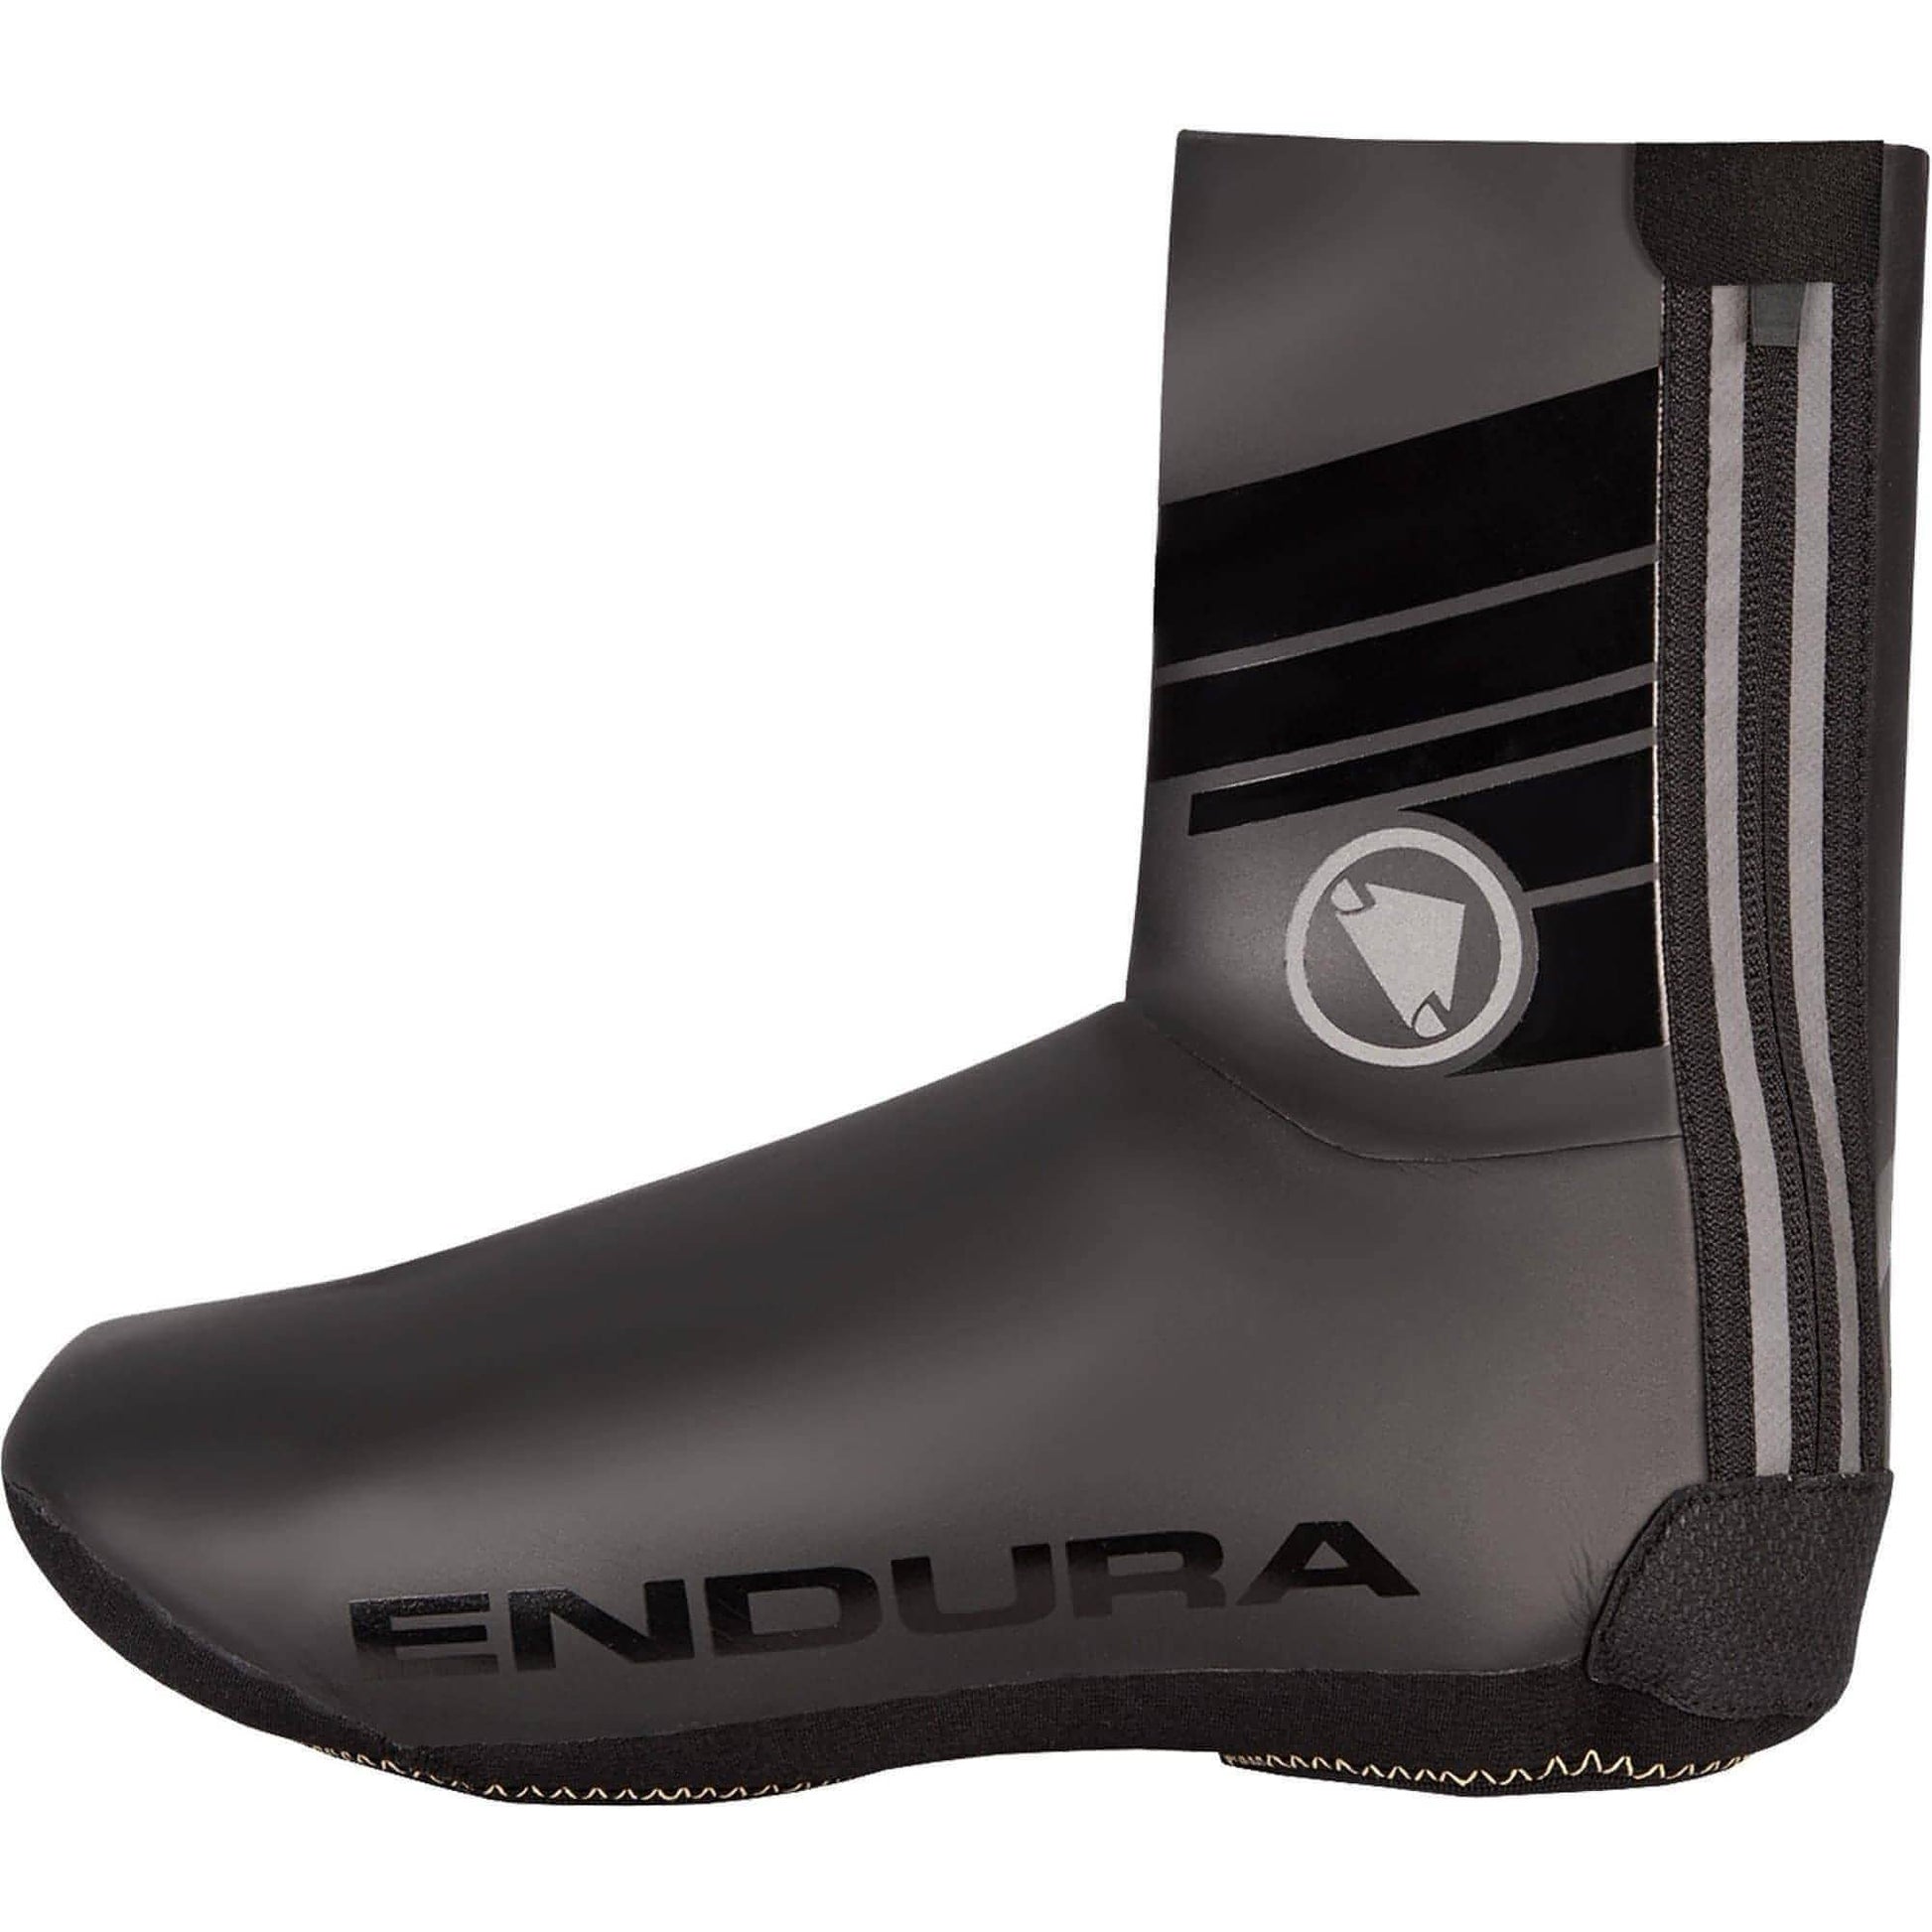 Endura Road Cycling Overshoes - Black 5055939988337 - Start Fitness